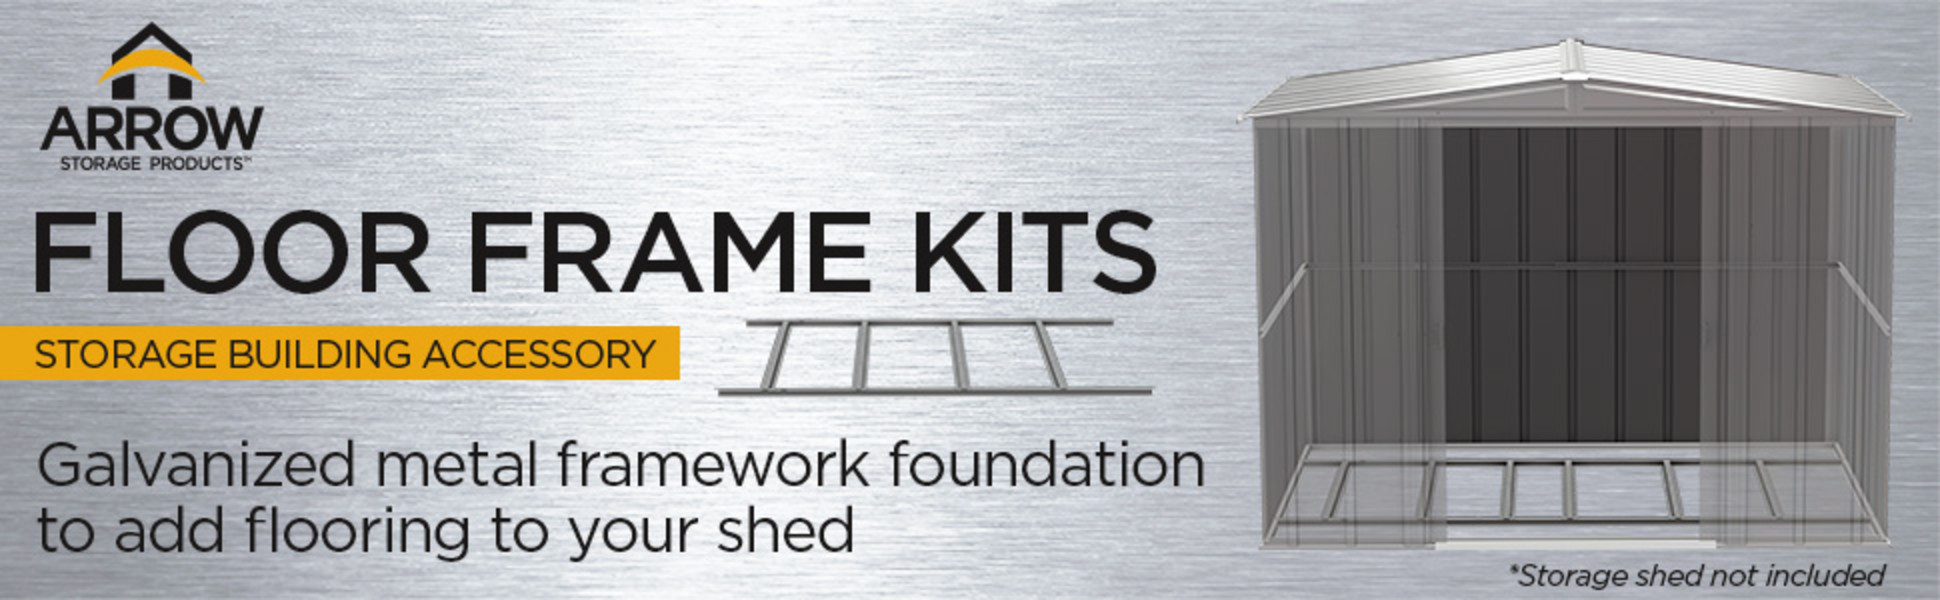 ARROW FLOOR FRAME KITS - Galvanized metal framework foundation to add flooring to your shed